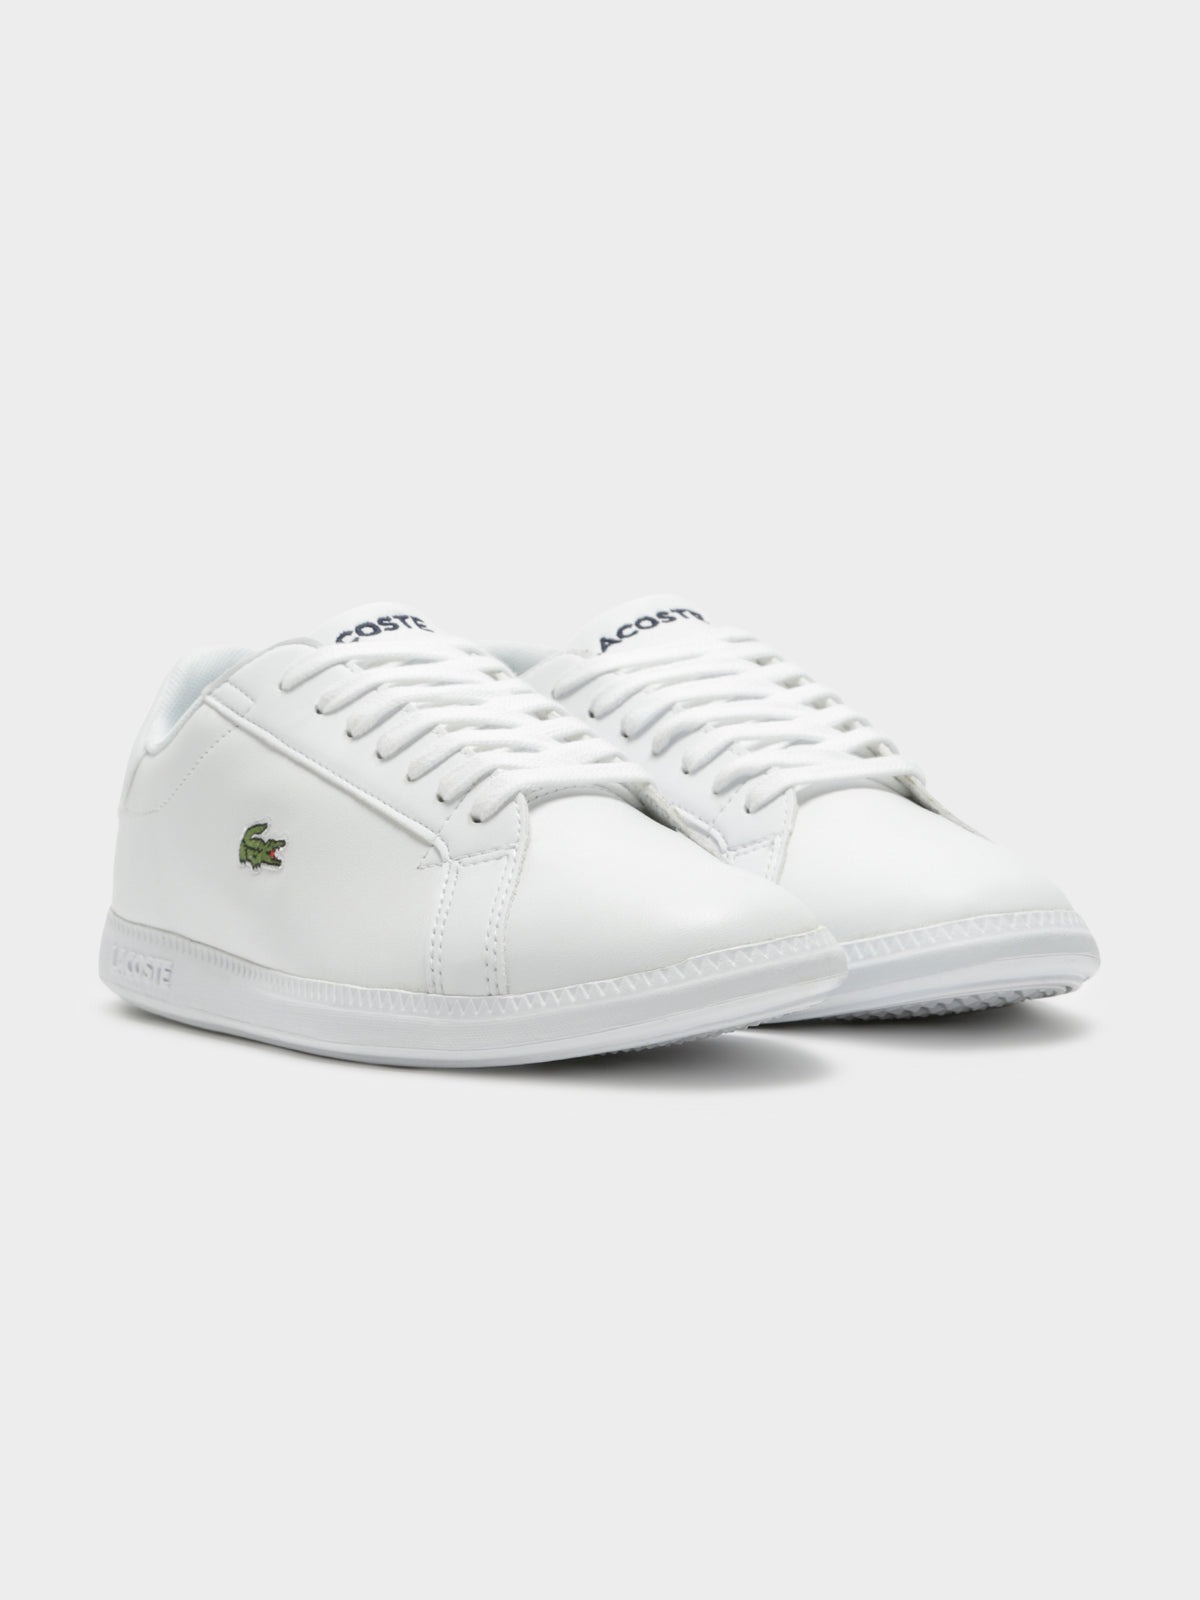 Womens Graduate BL 1 Sneakers in White